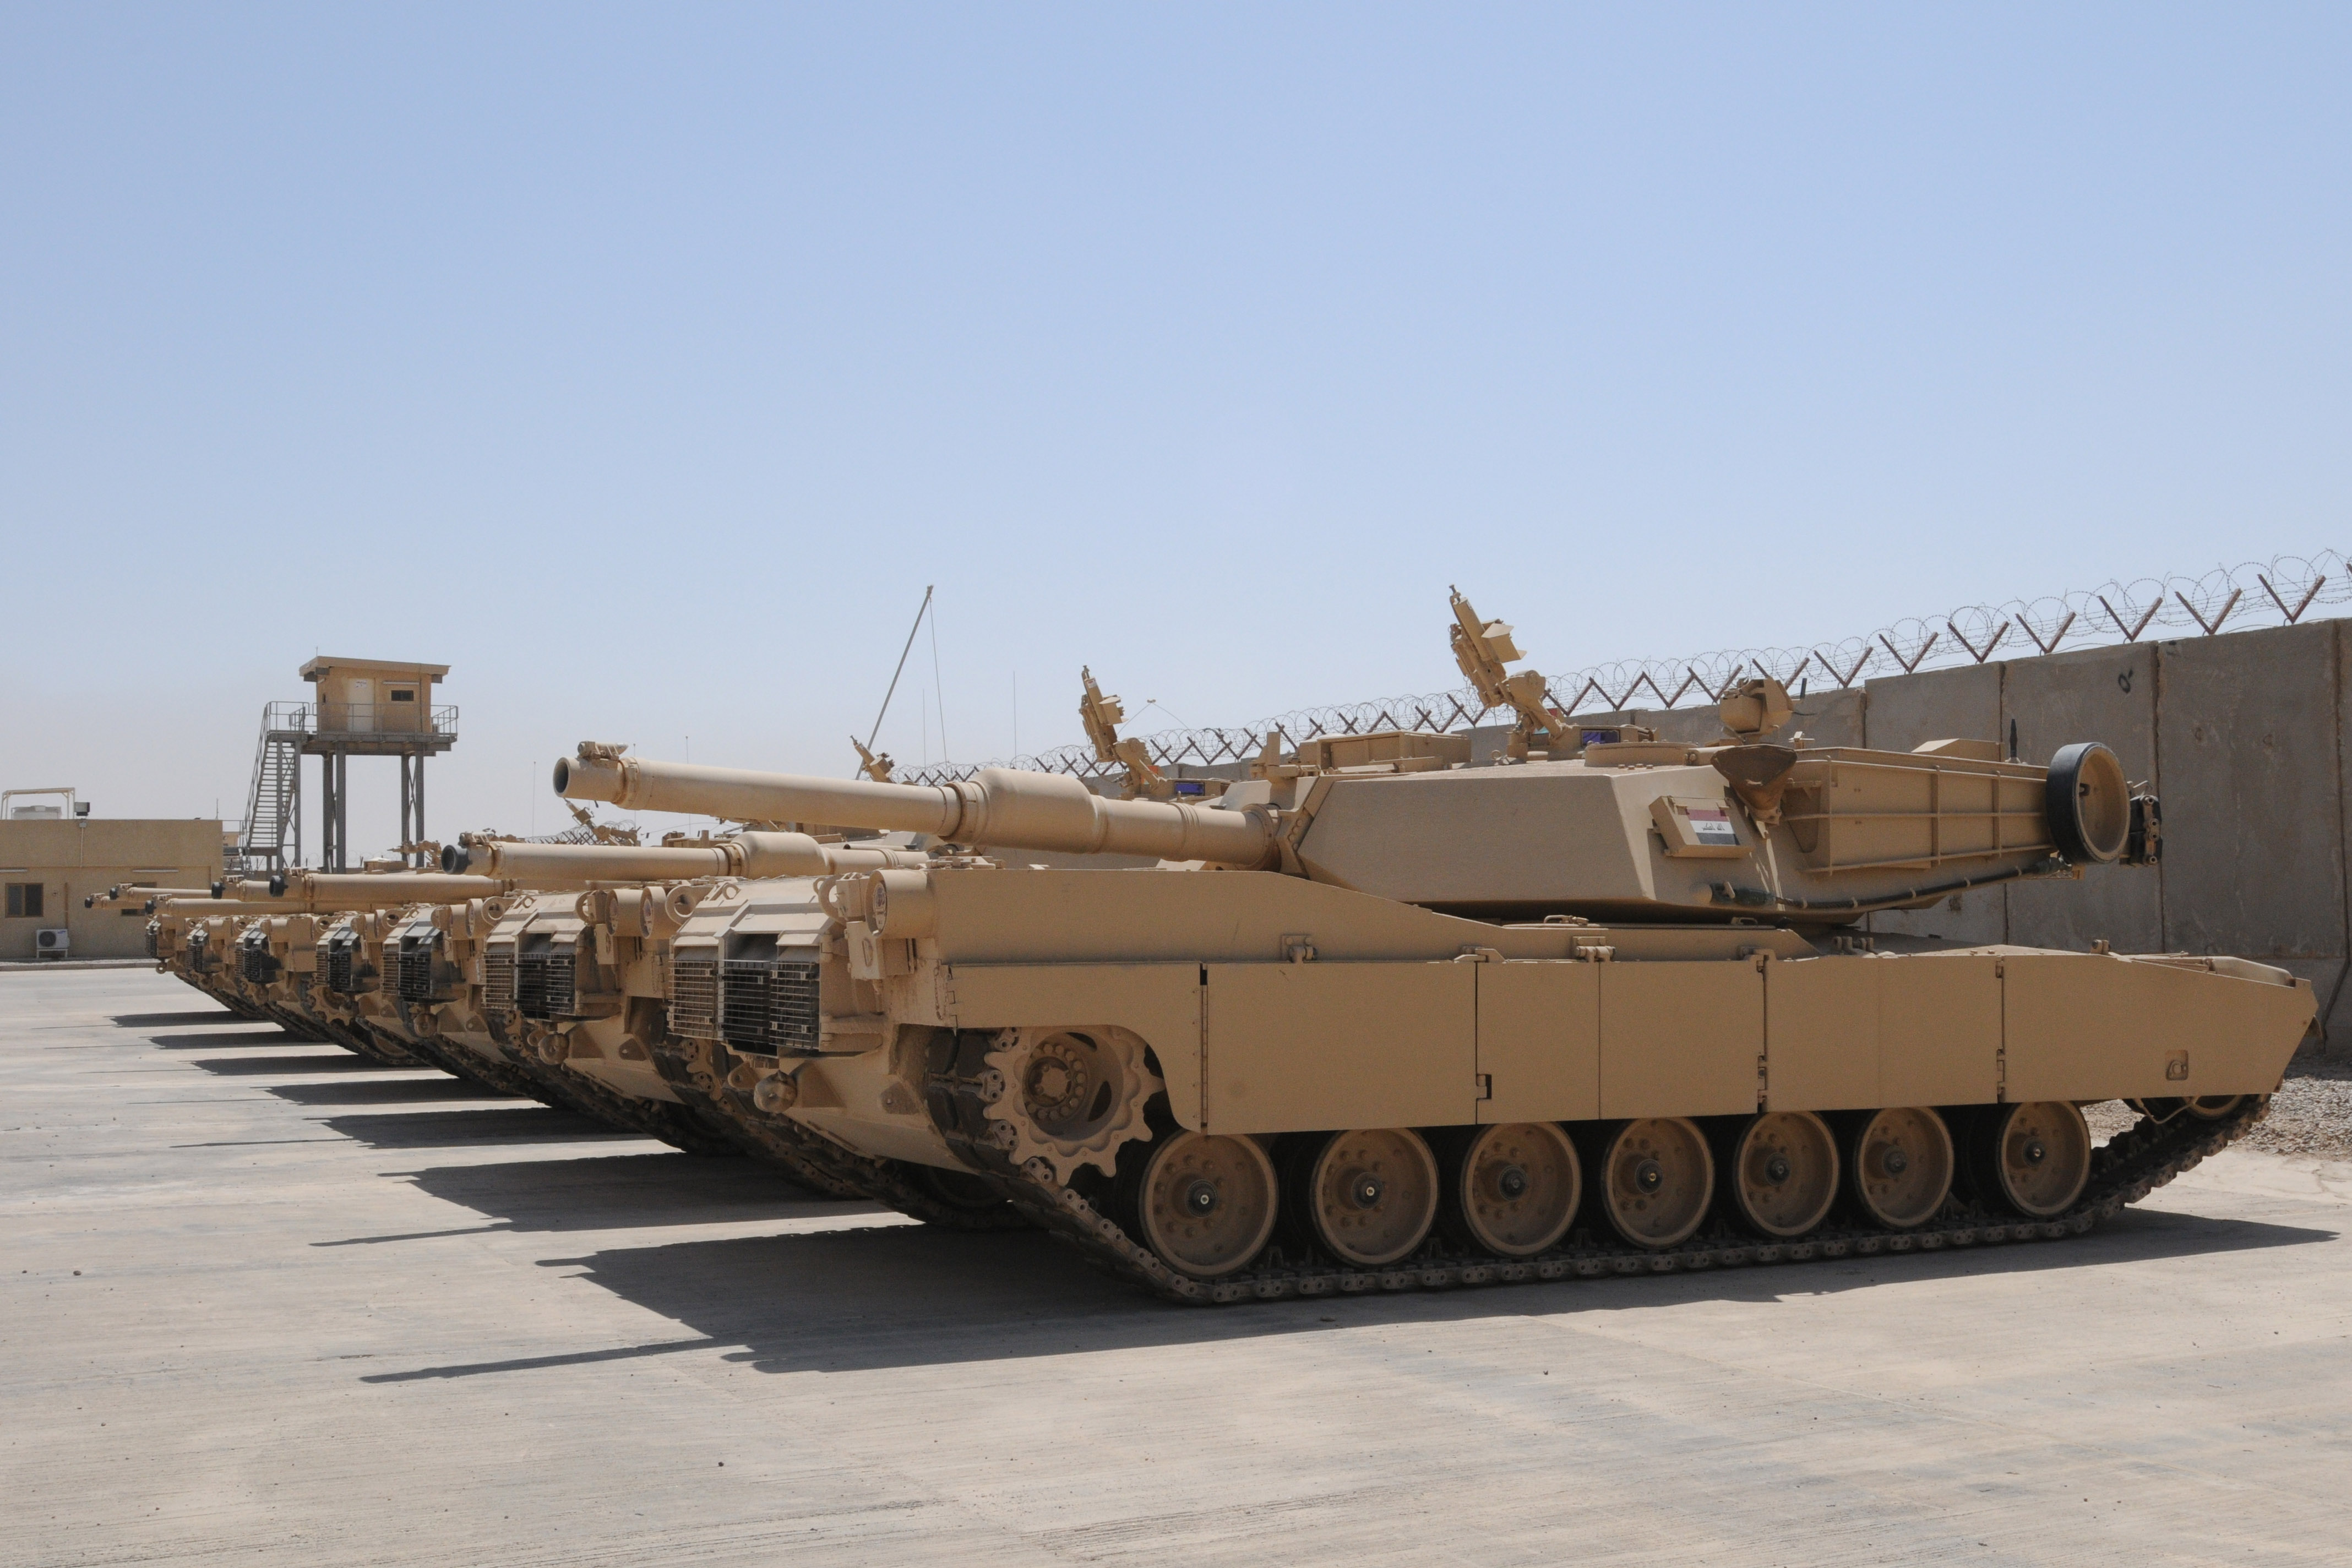 The last shipment of M1A1 Abrams tanks arrived mid-August completing the Government of Iraq's purchase of 140 tanks through a Foreign Military Sales agreement with the United States.